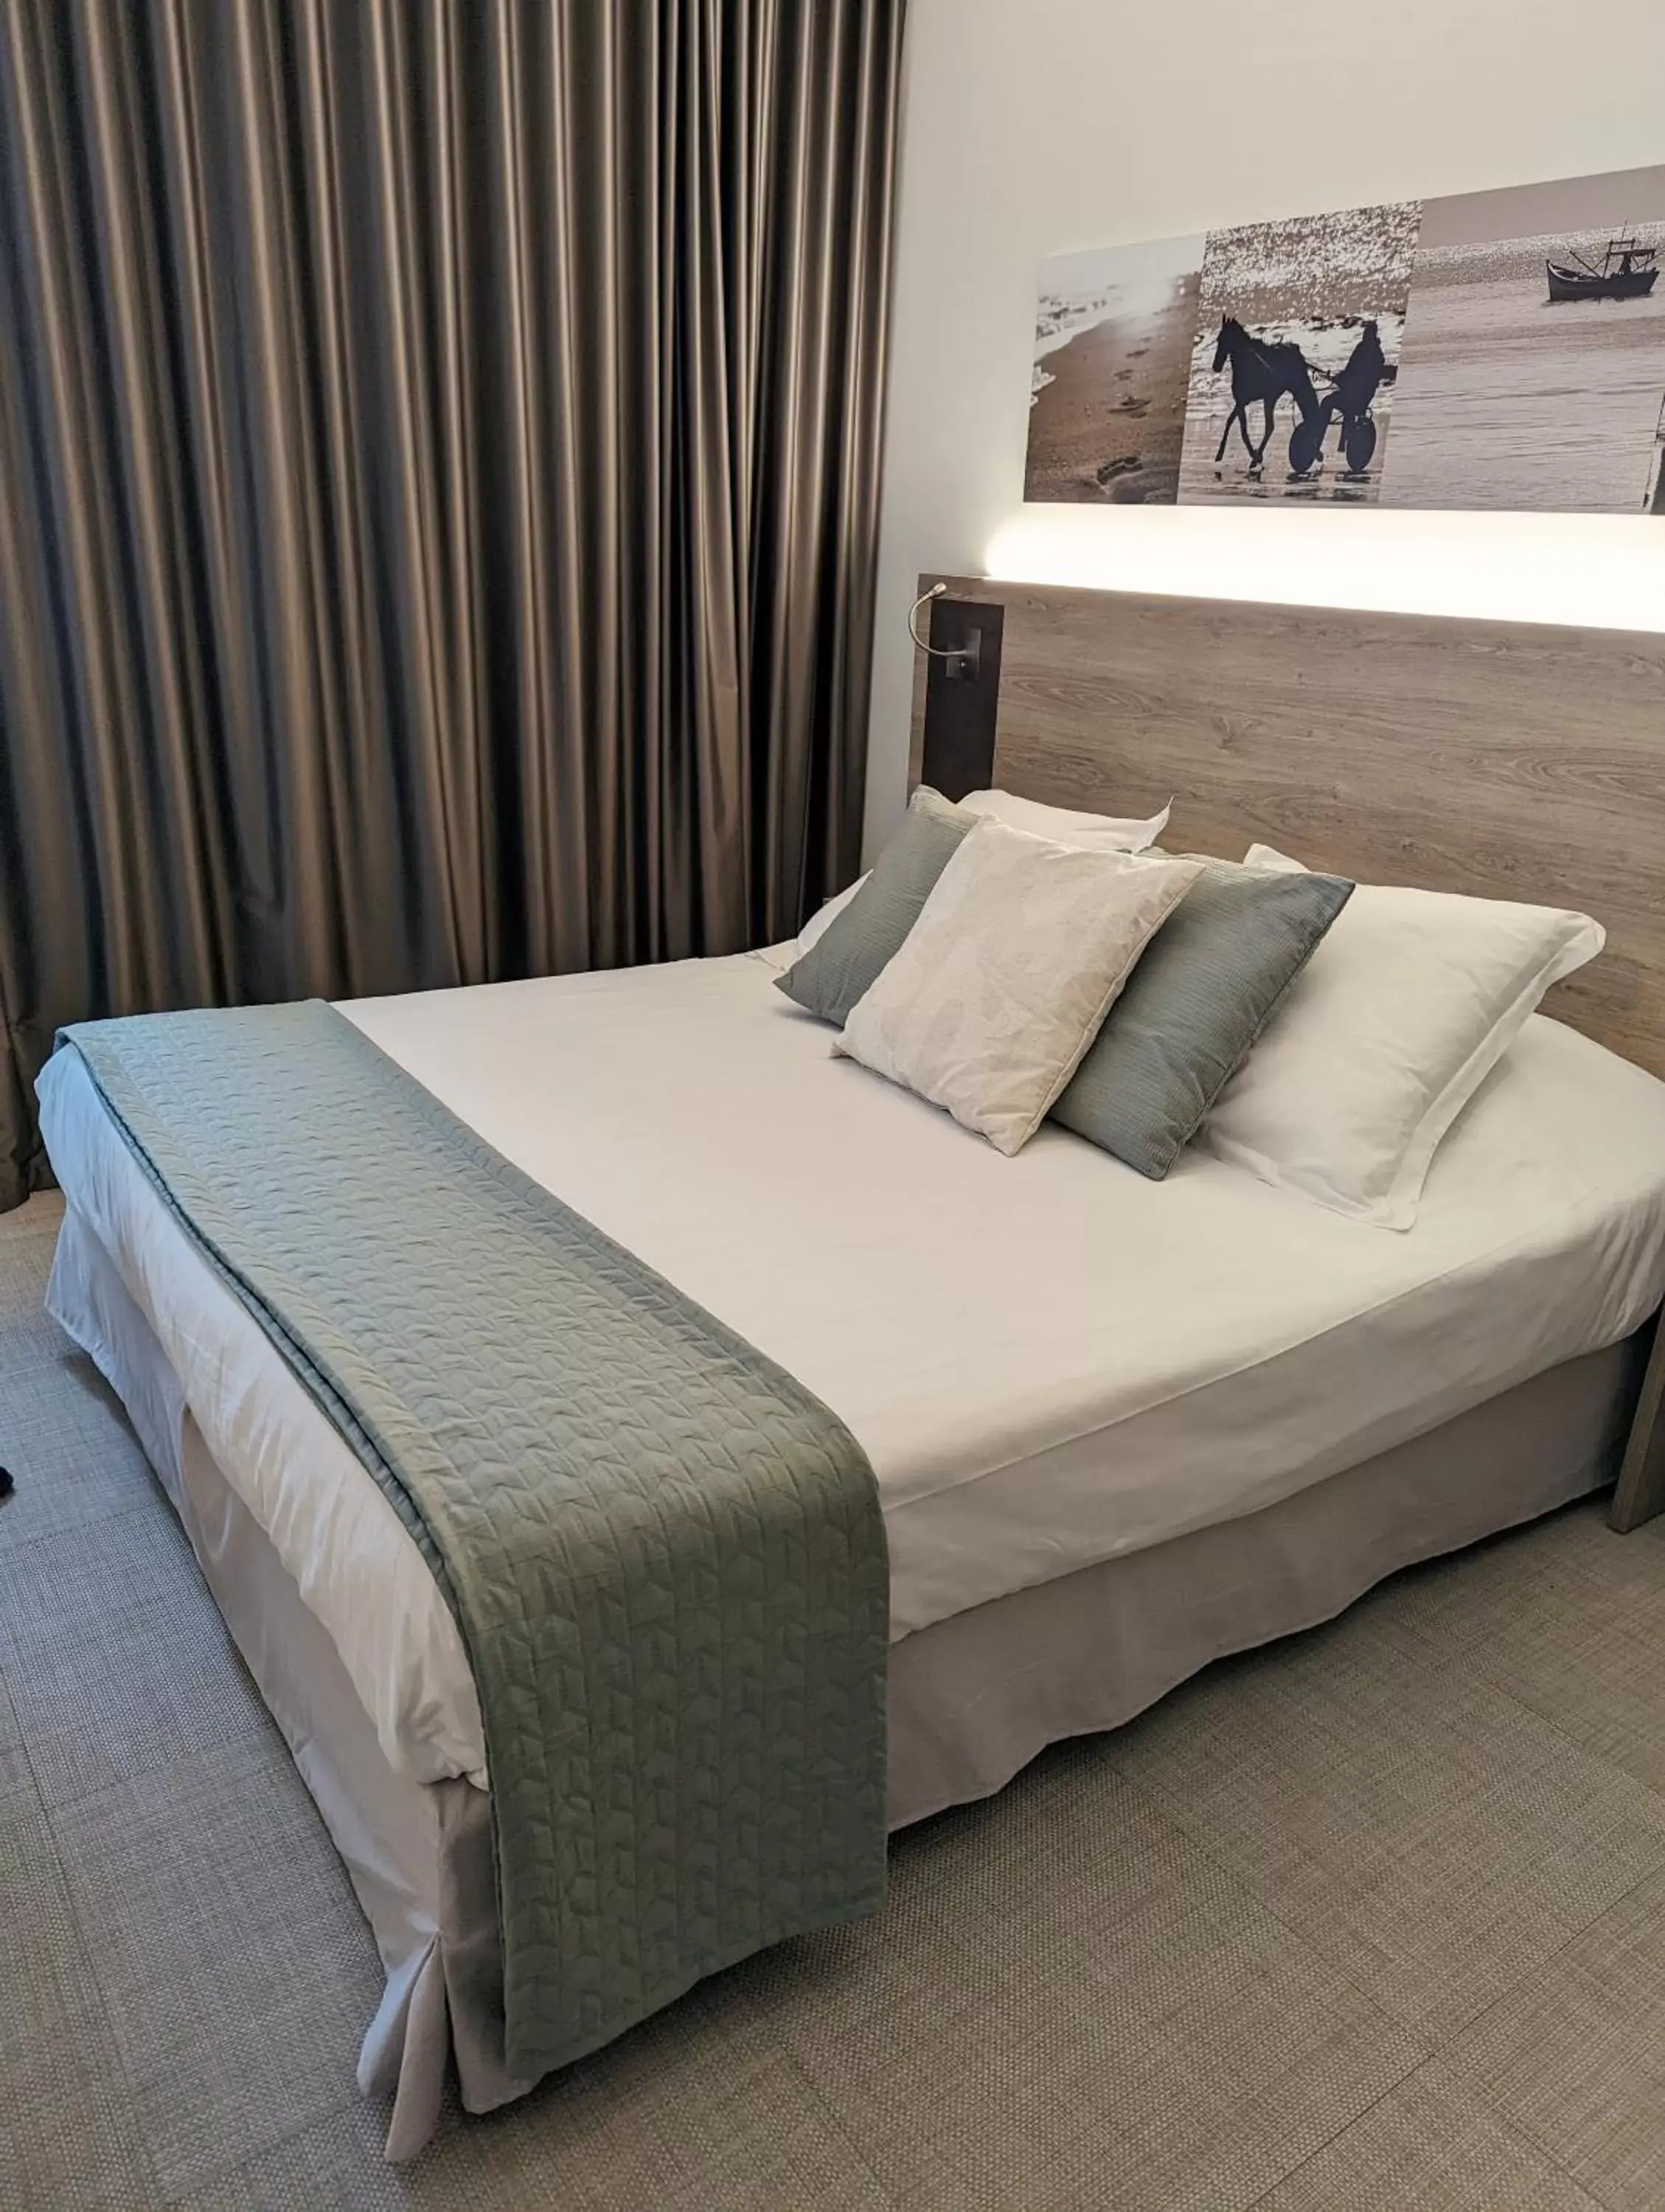 Bed in Kyriad Prestige Residence Cabourg-Dives-sur-Mer